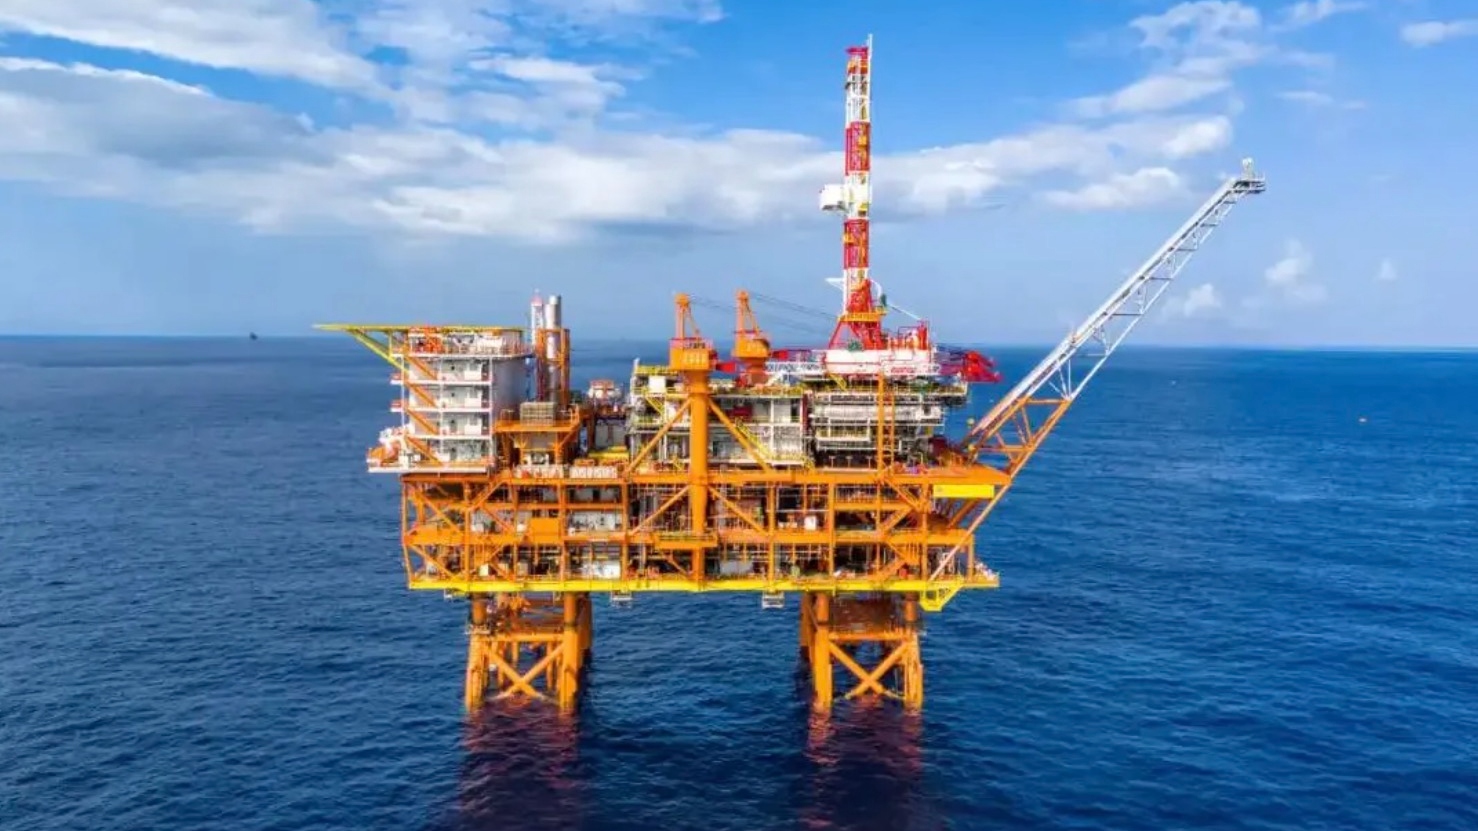 A view of China's first intelligent offshore drilling platform 